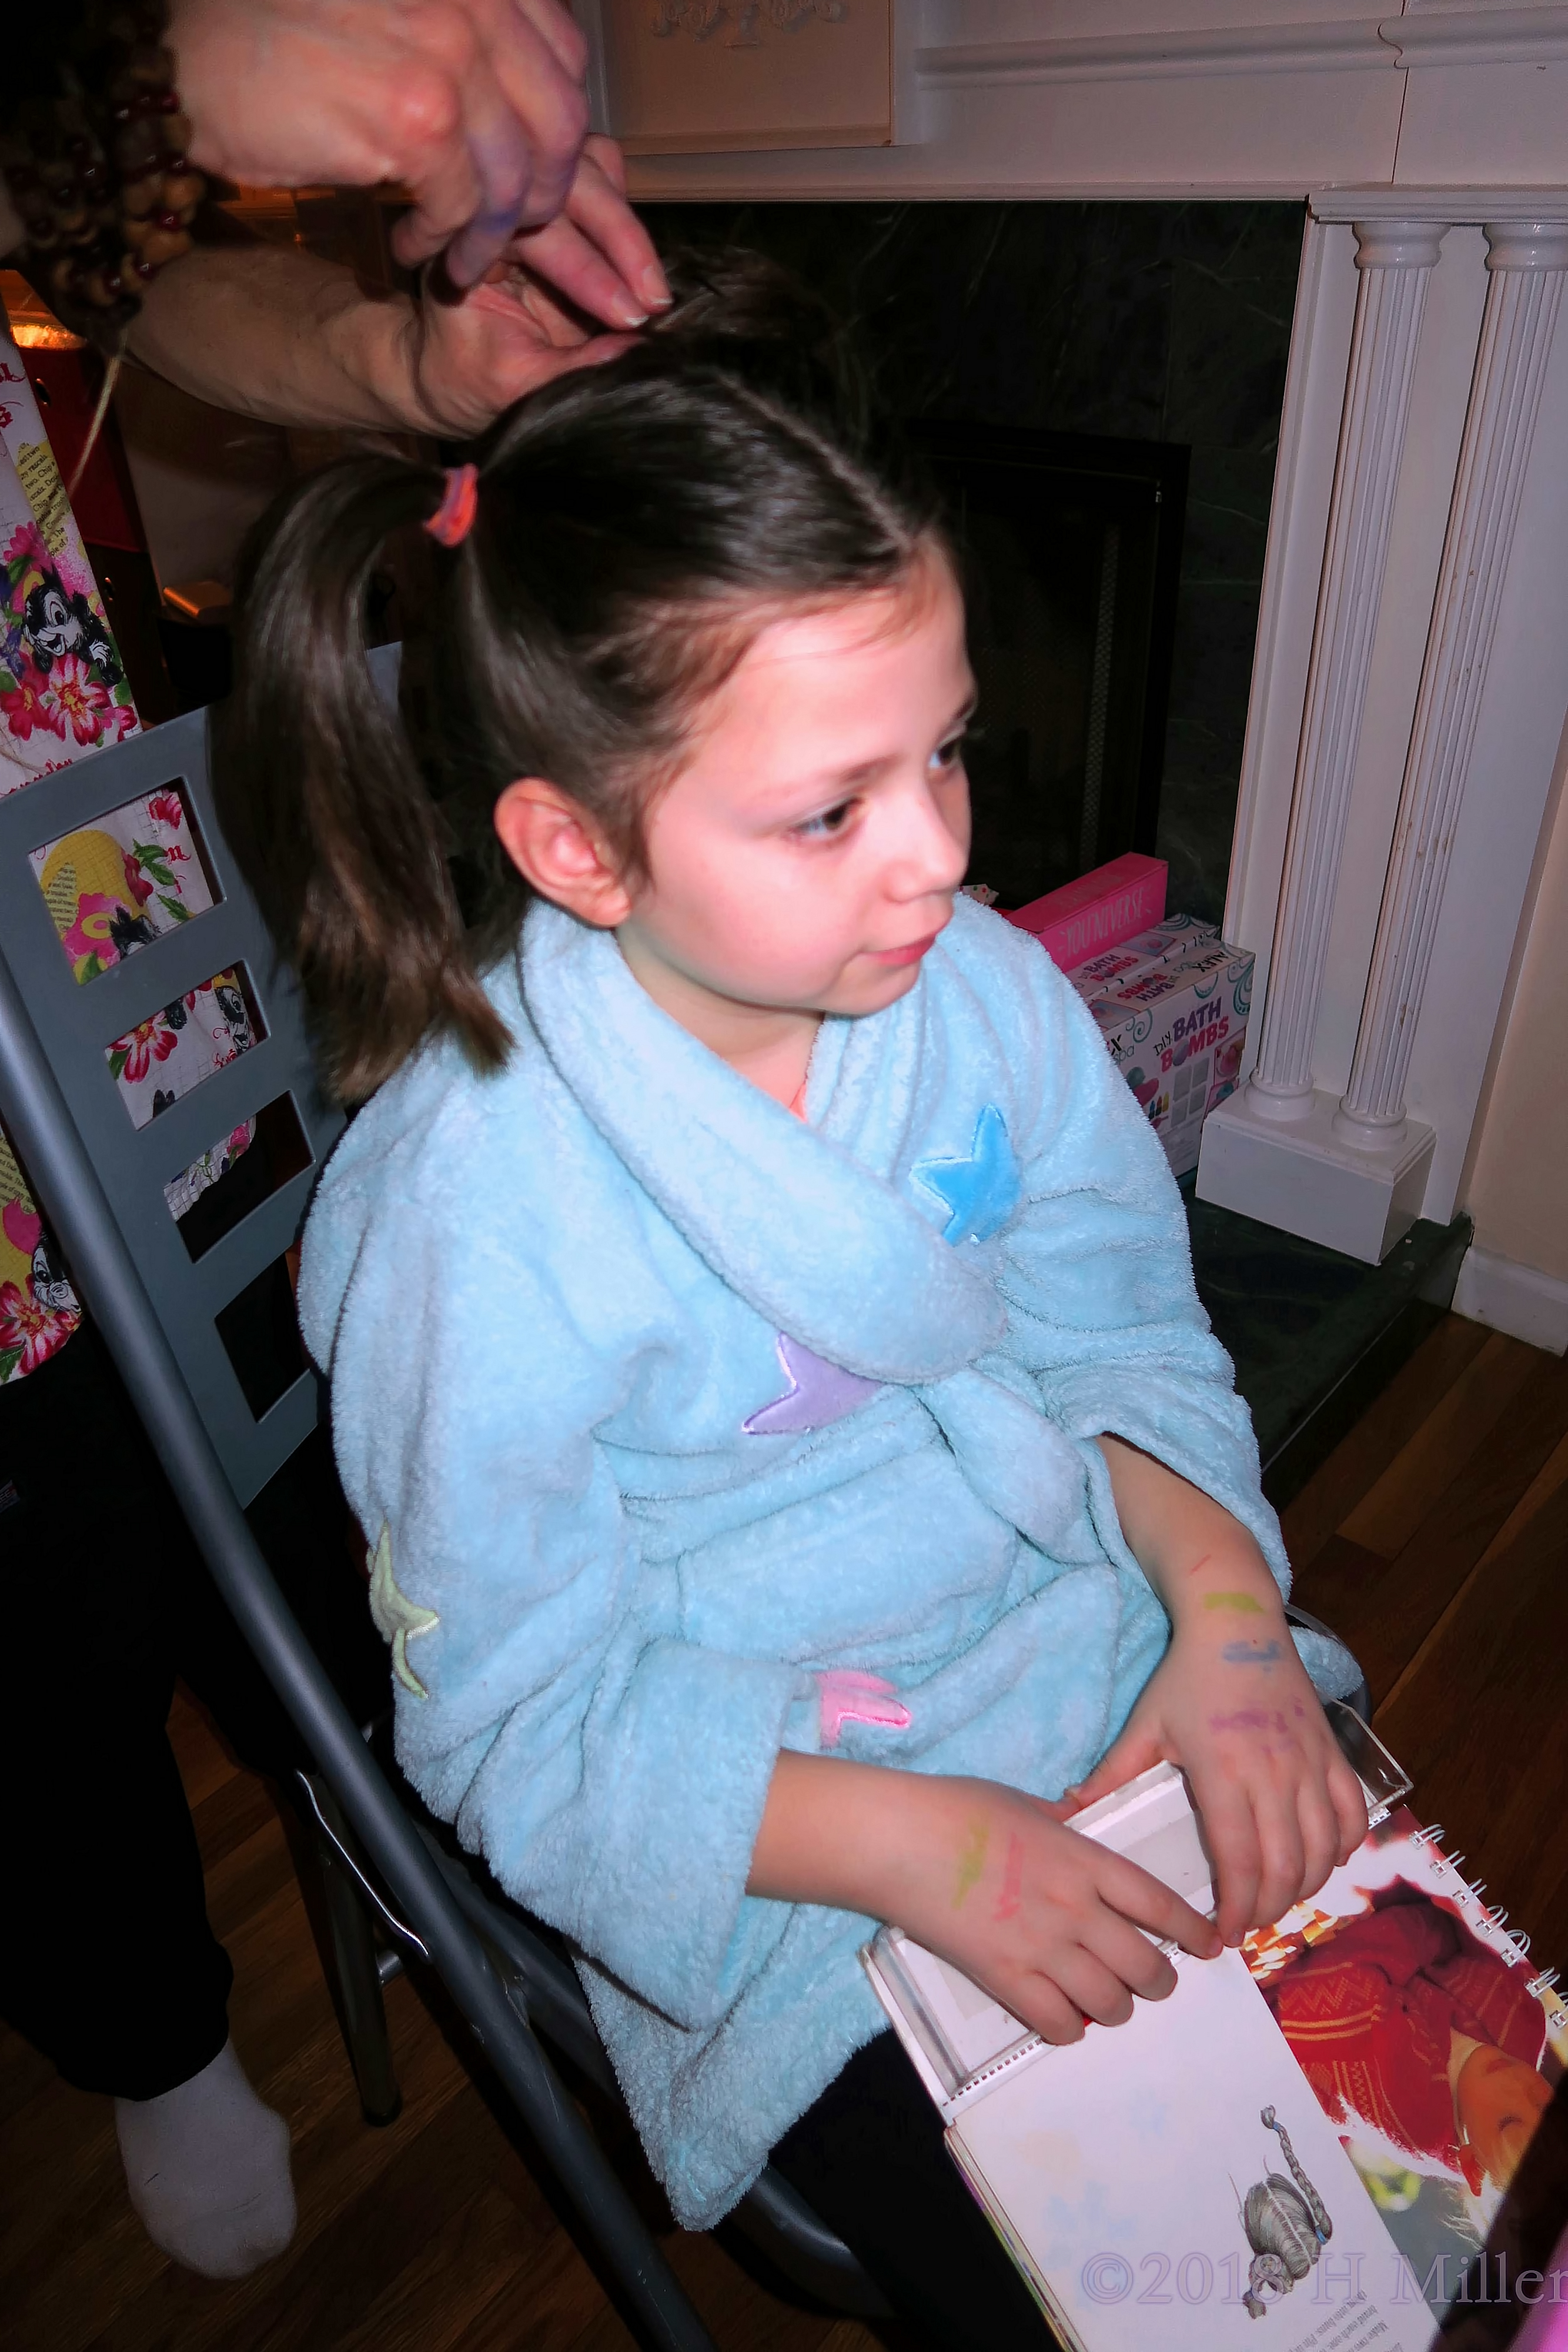 Pigtails And Picking A Craft! Kids Party Guest Gets Kids Hairstyle Done! 